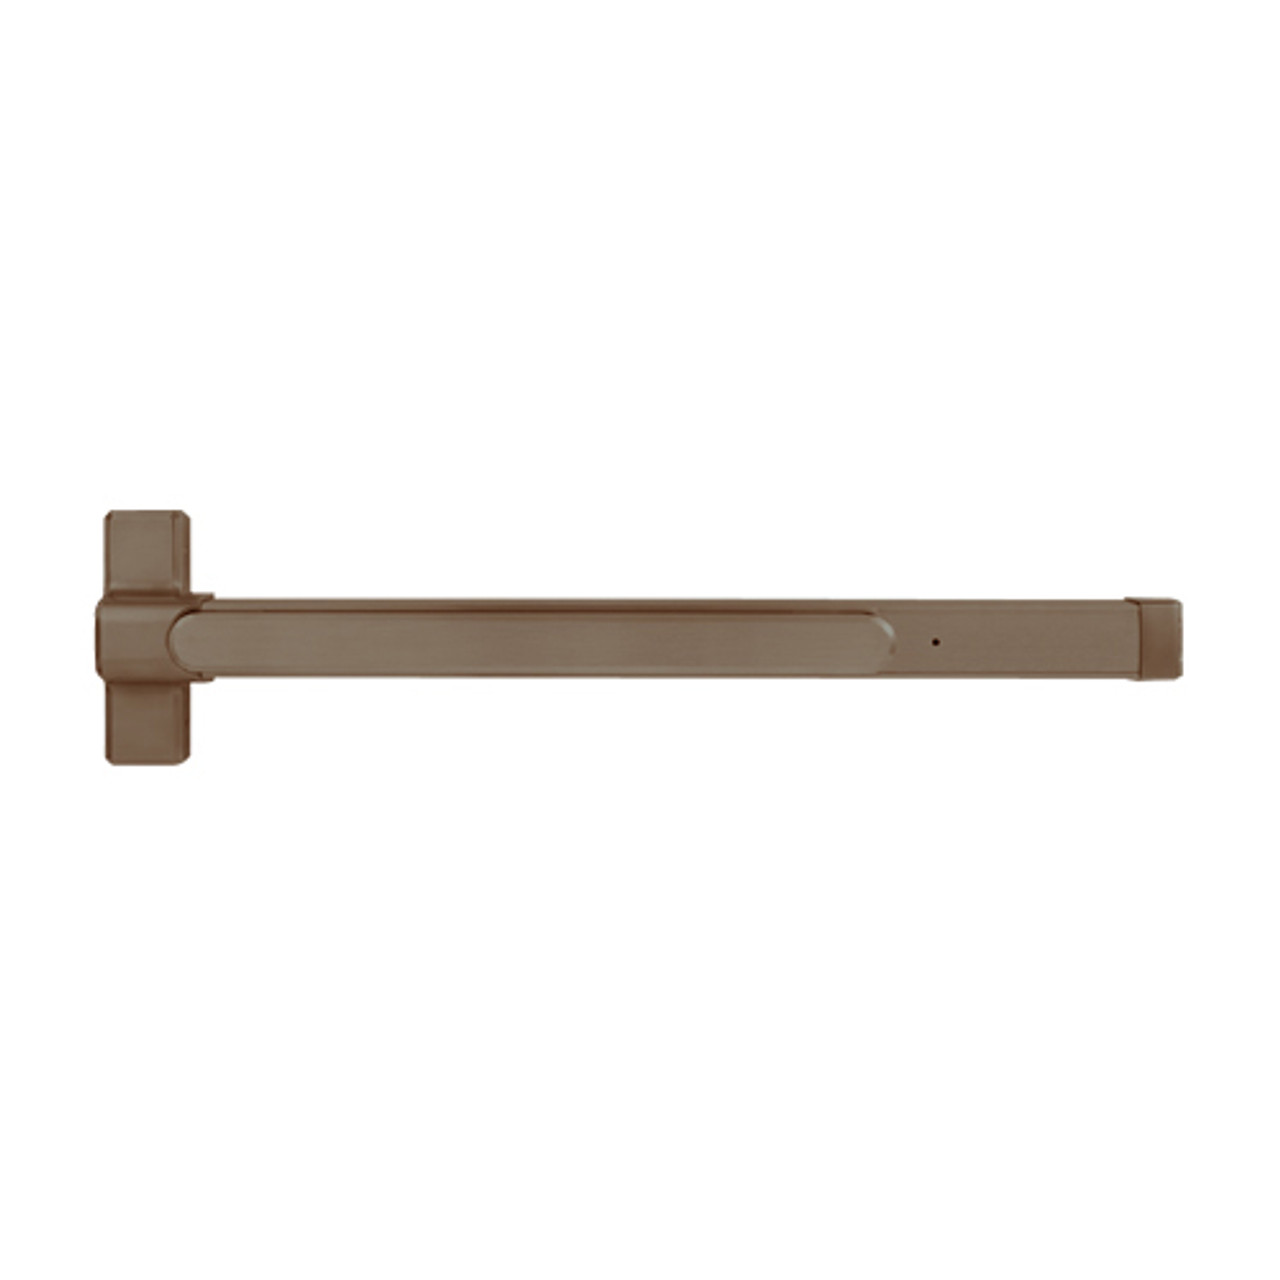 QED119LR-36-7-313AN Stanley QED100 Series Heavy Duty Surface Vertical Rod Fire Rated Exit Device in Anodized Duranodic Bronze Finish